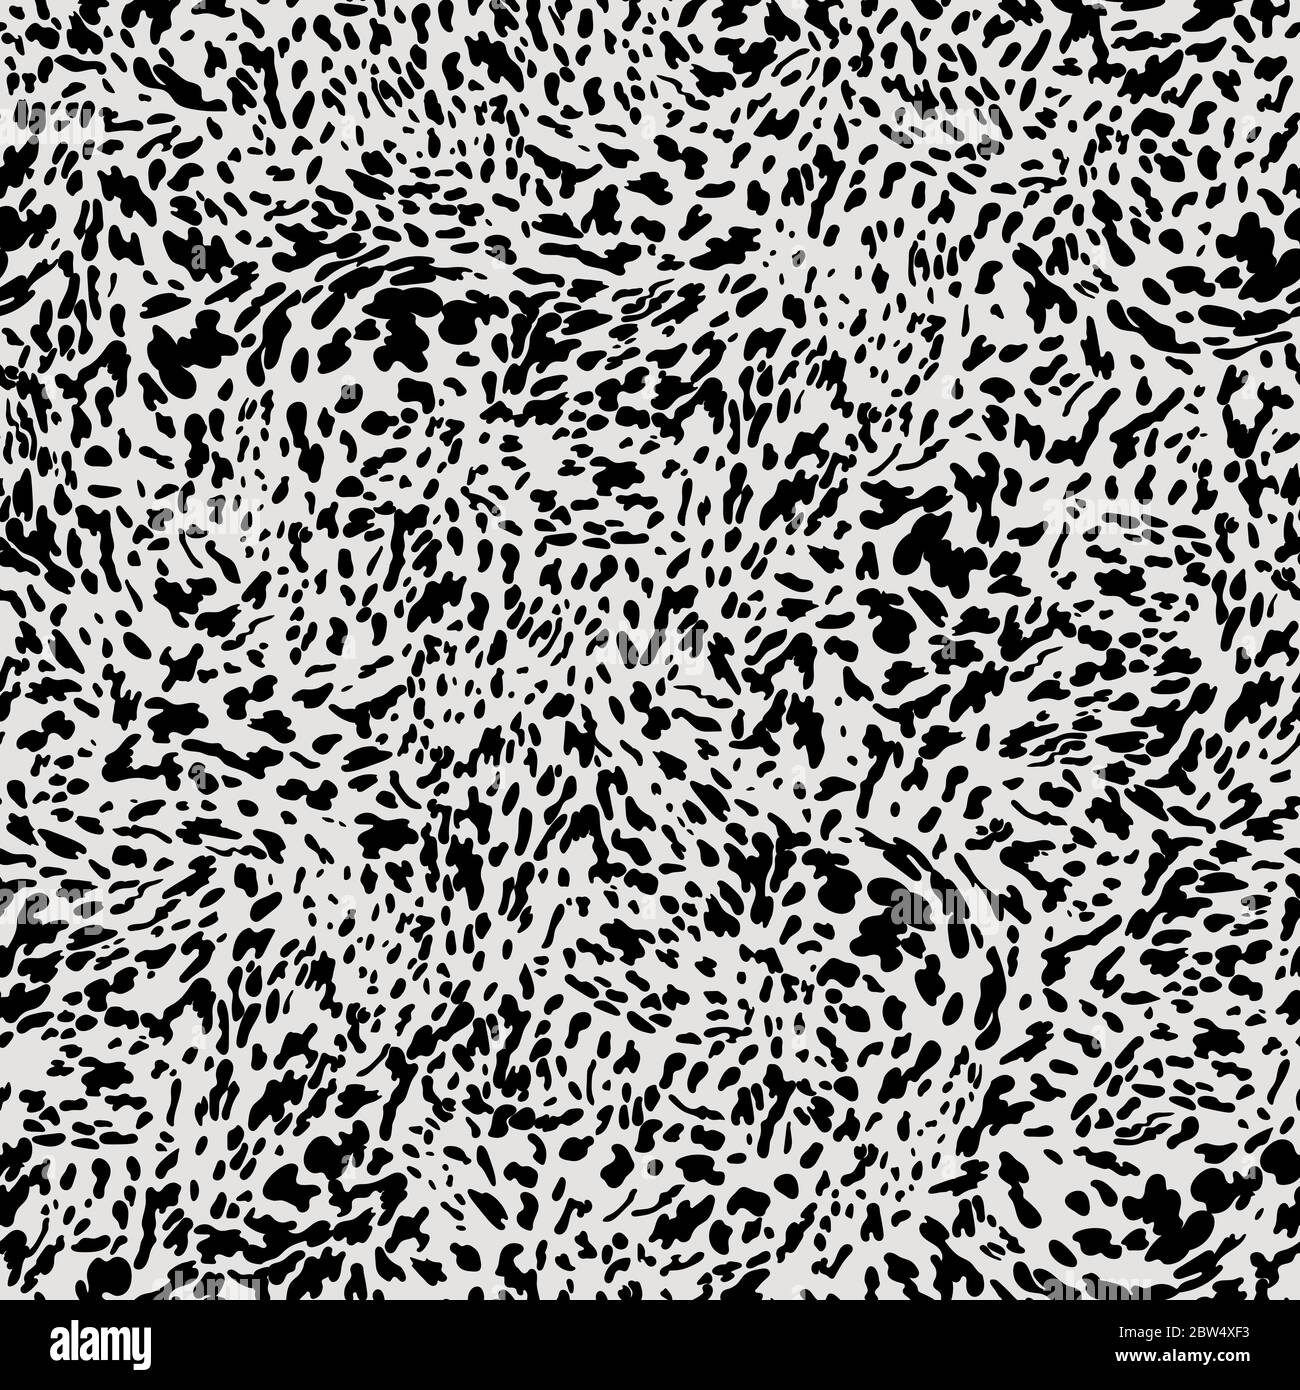 Appaloosa animal print seamless pattern design. Leopard, cowhide, horse skin pattern with small black spots on white background. Animal print Stock Vector